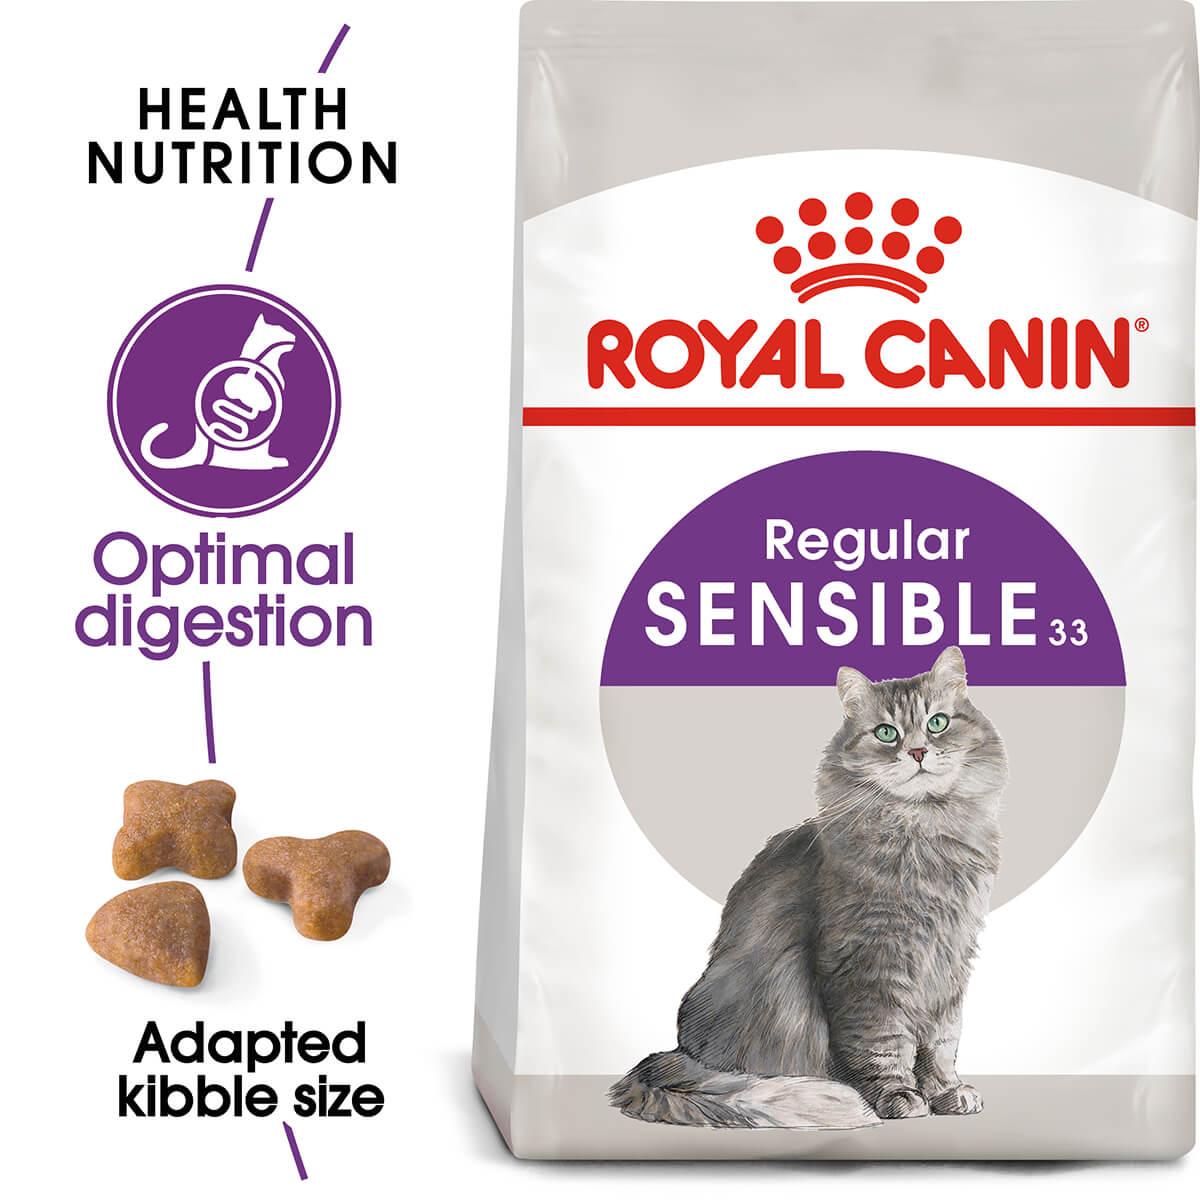 Royal Canin Sensible Digestion Adult Dry Cat Food